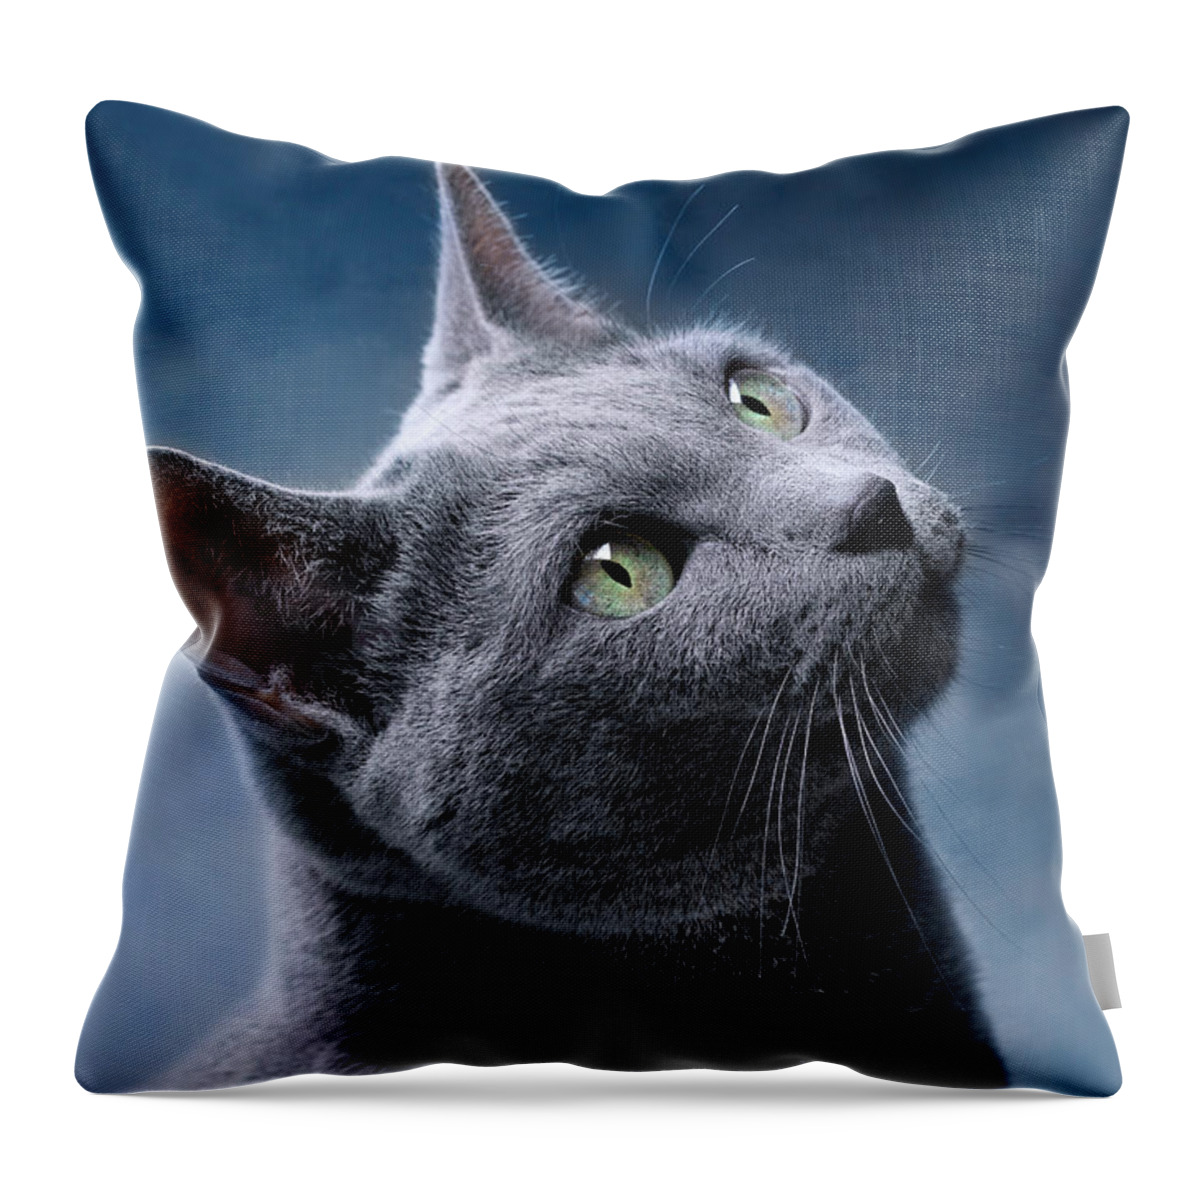 Russian Throw Pillow featuring the photograph Russian Blue Cat by Nailia Schwarz